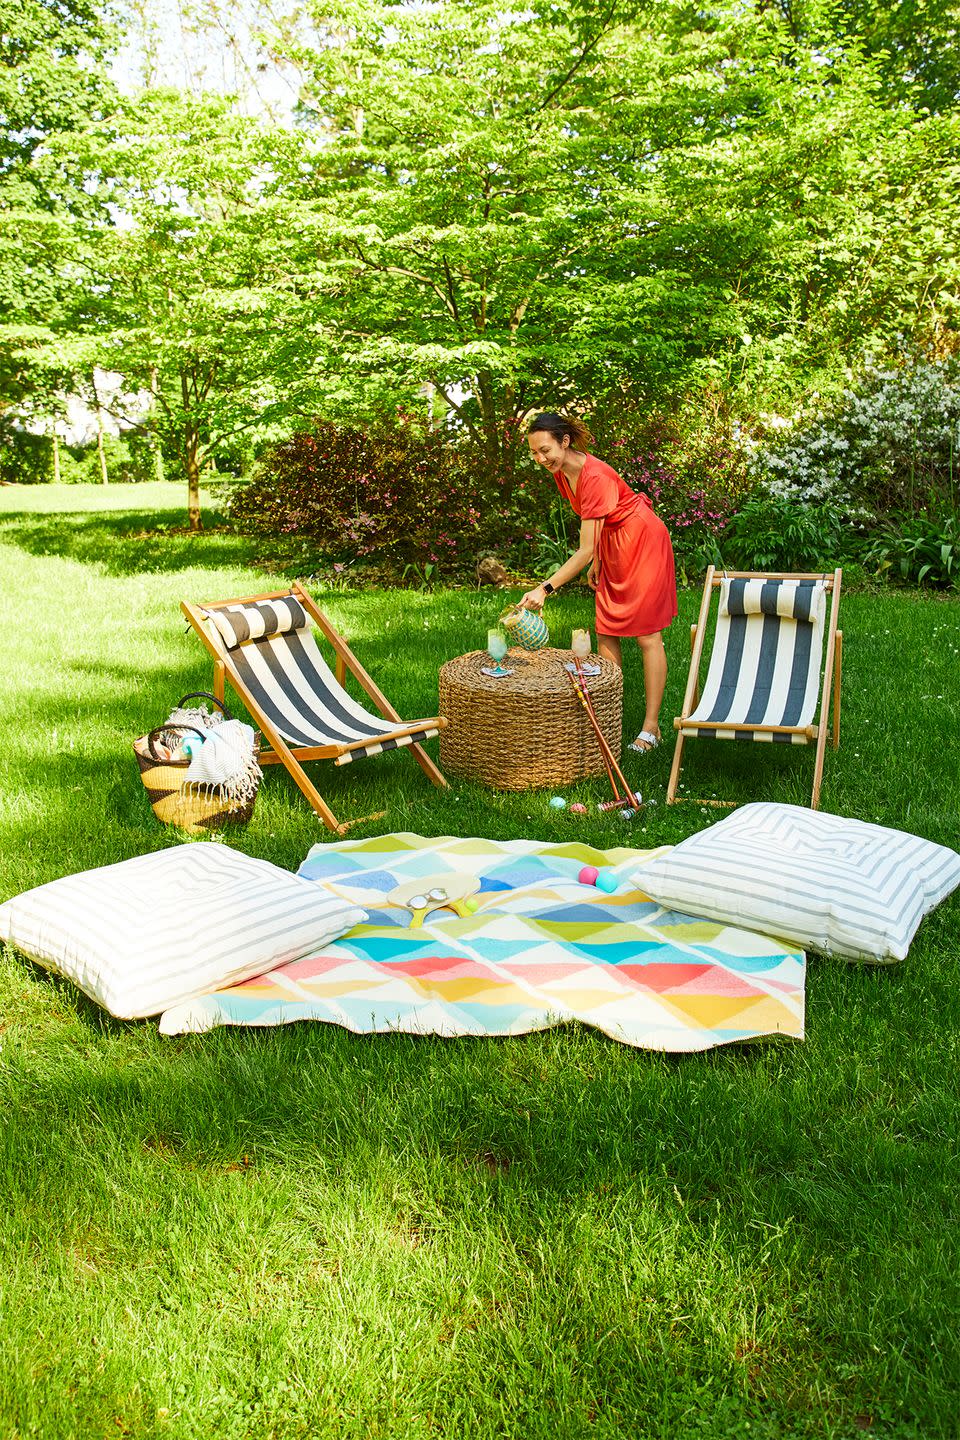 <p>Since lawn furniture may be too bulky to suit the size of your space, go for folding chairs that can be stored easily when they're not in use. For a warm and inviting vibe, throw an outdoor rug and floor pillows on the surrounding grass. </p>